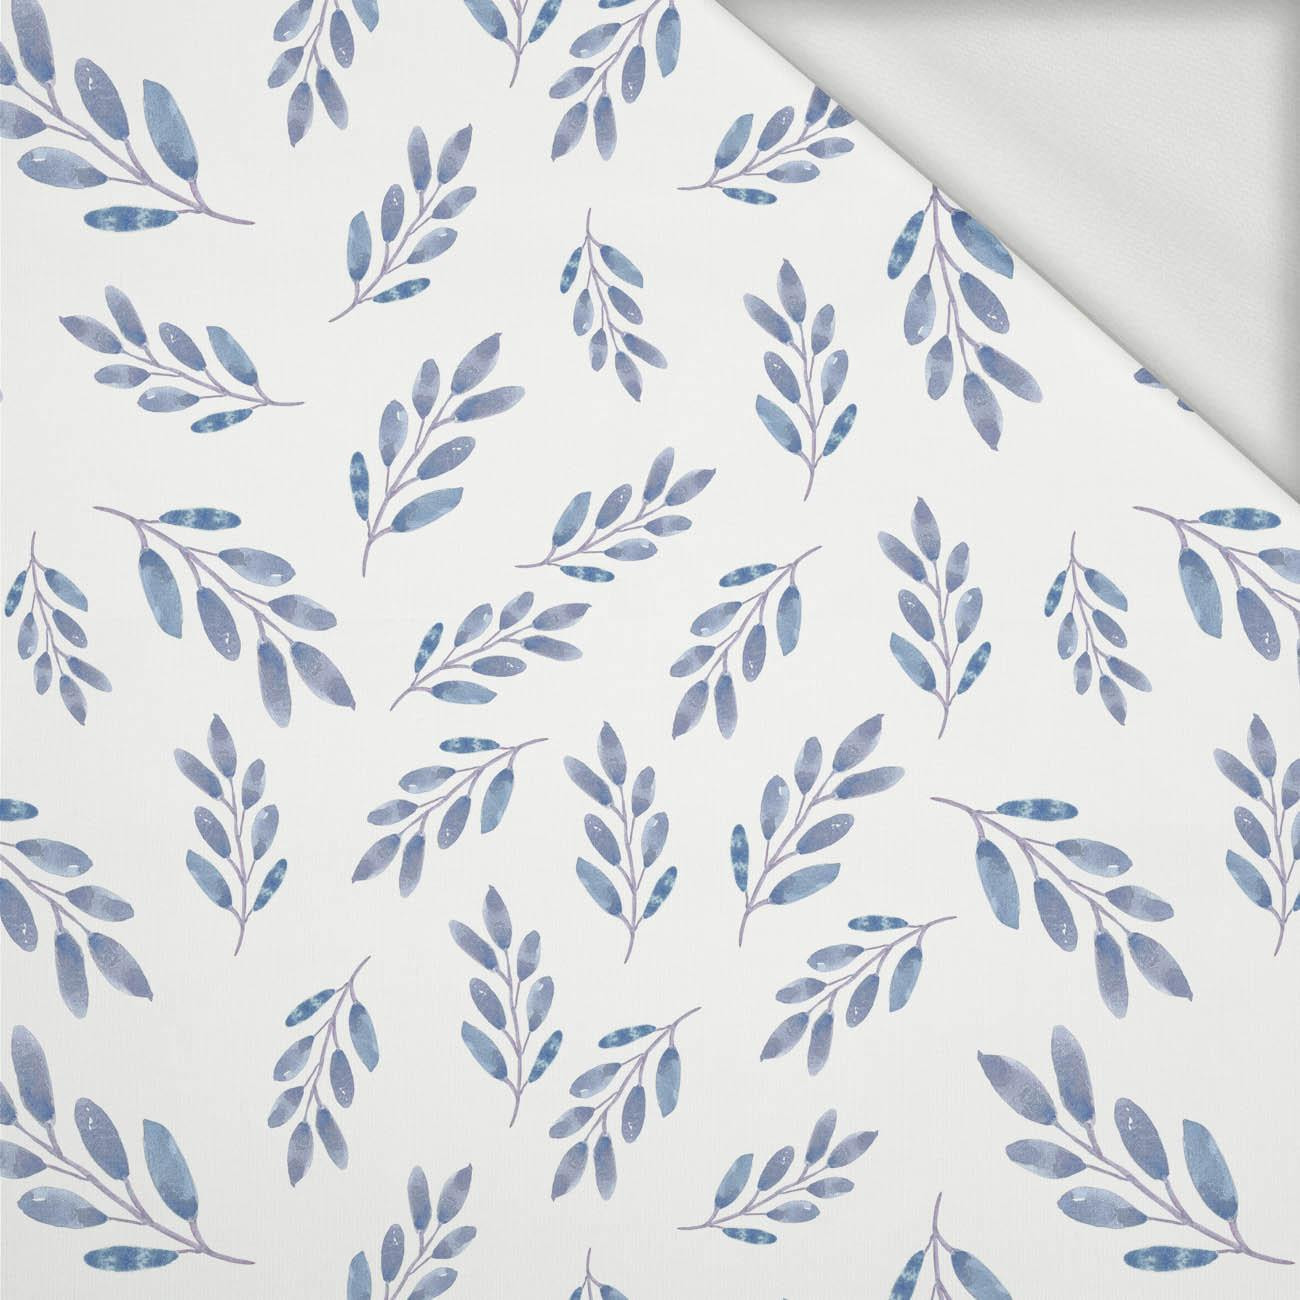 71cm BLUE LEAVES pat. 2 / white - looped knit fabric